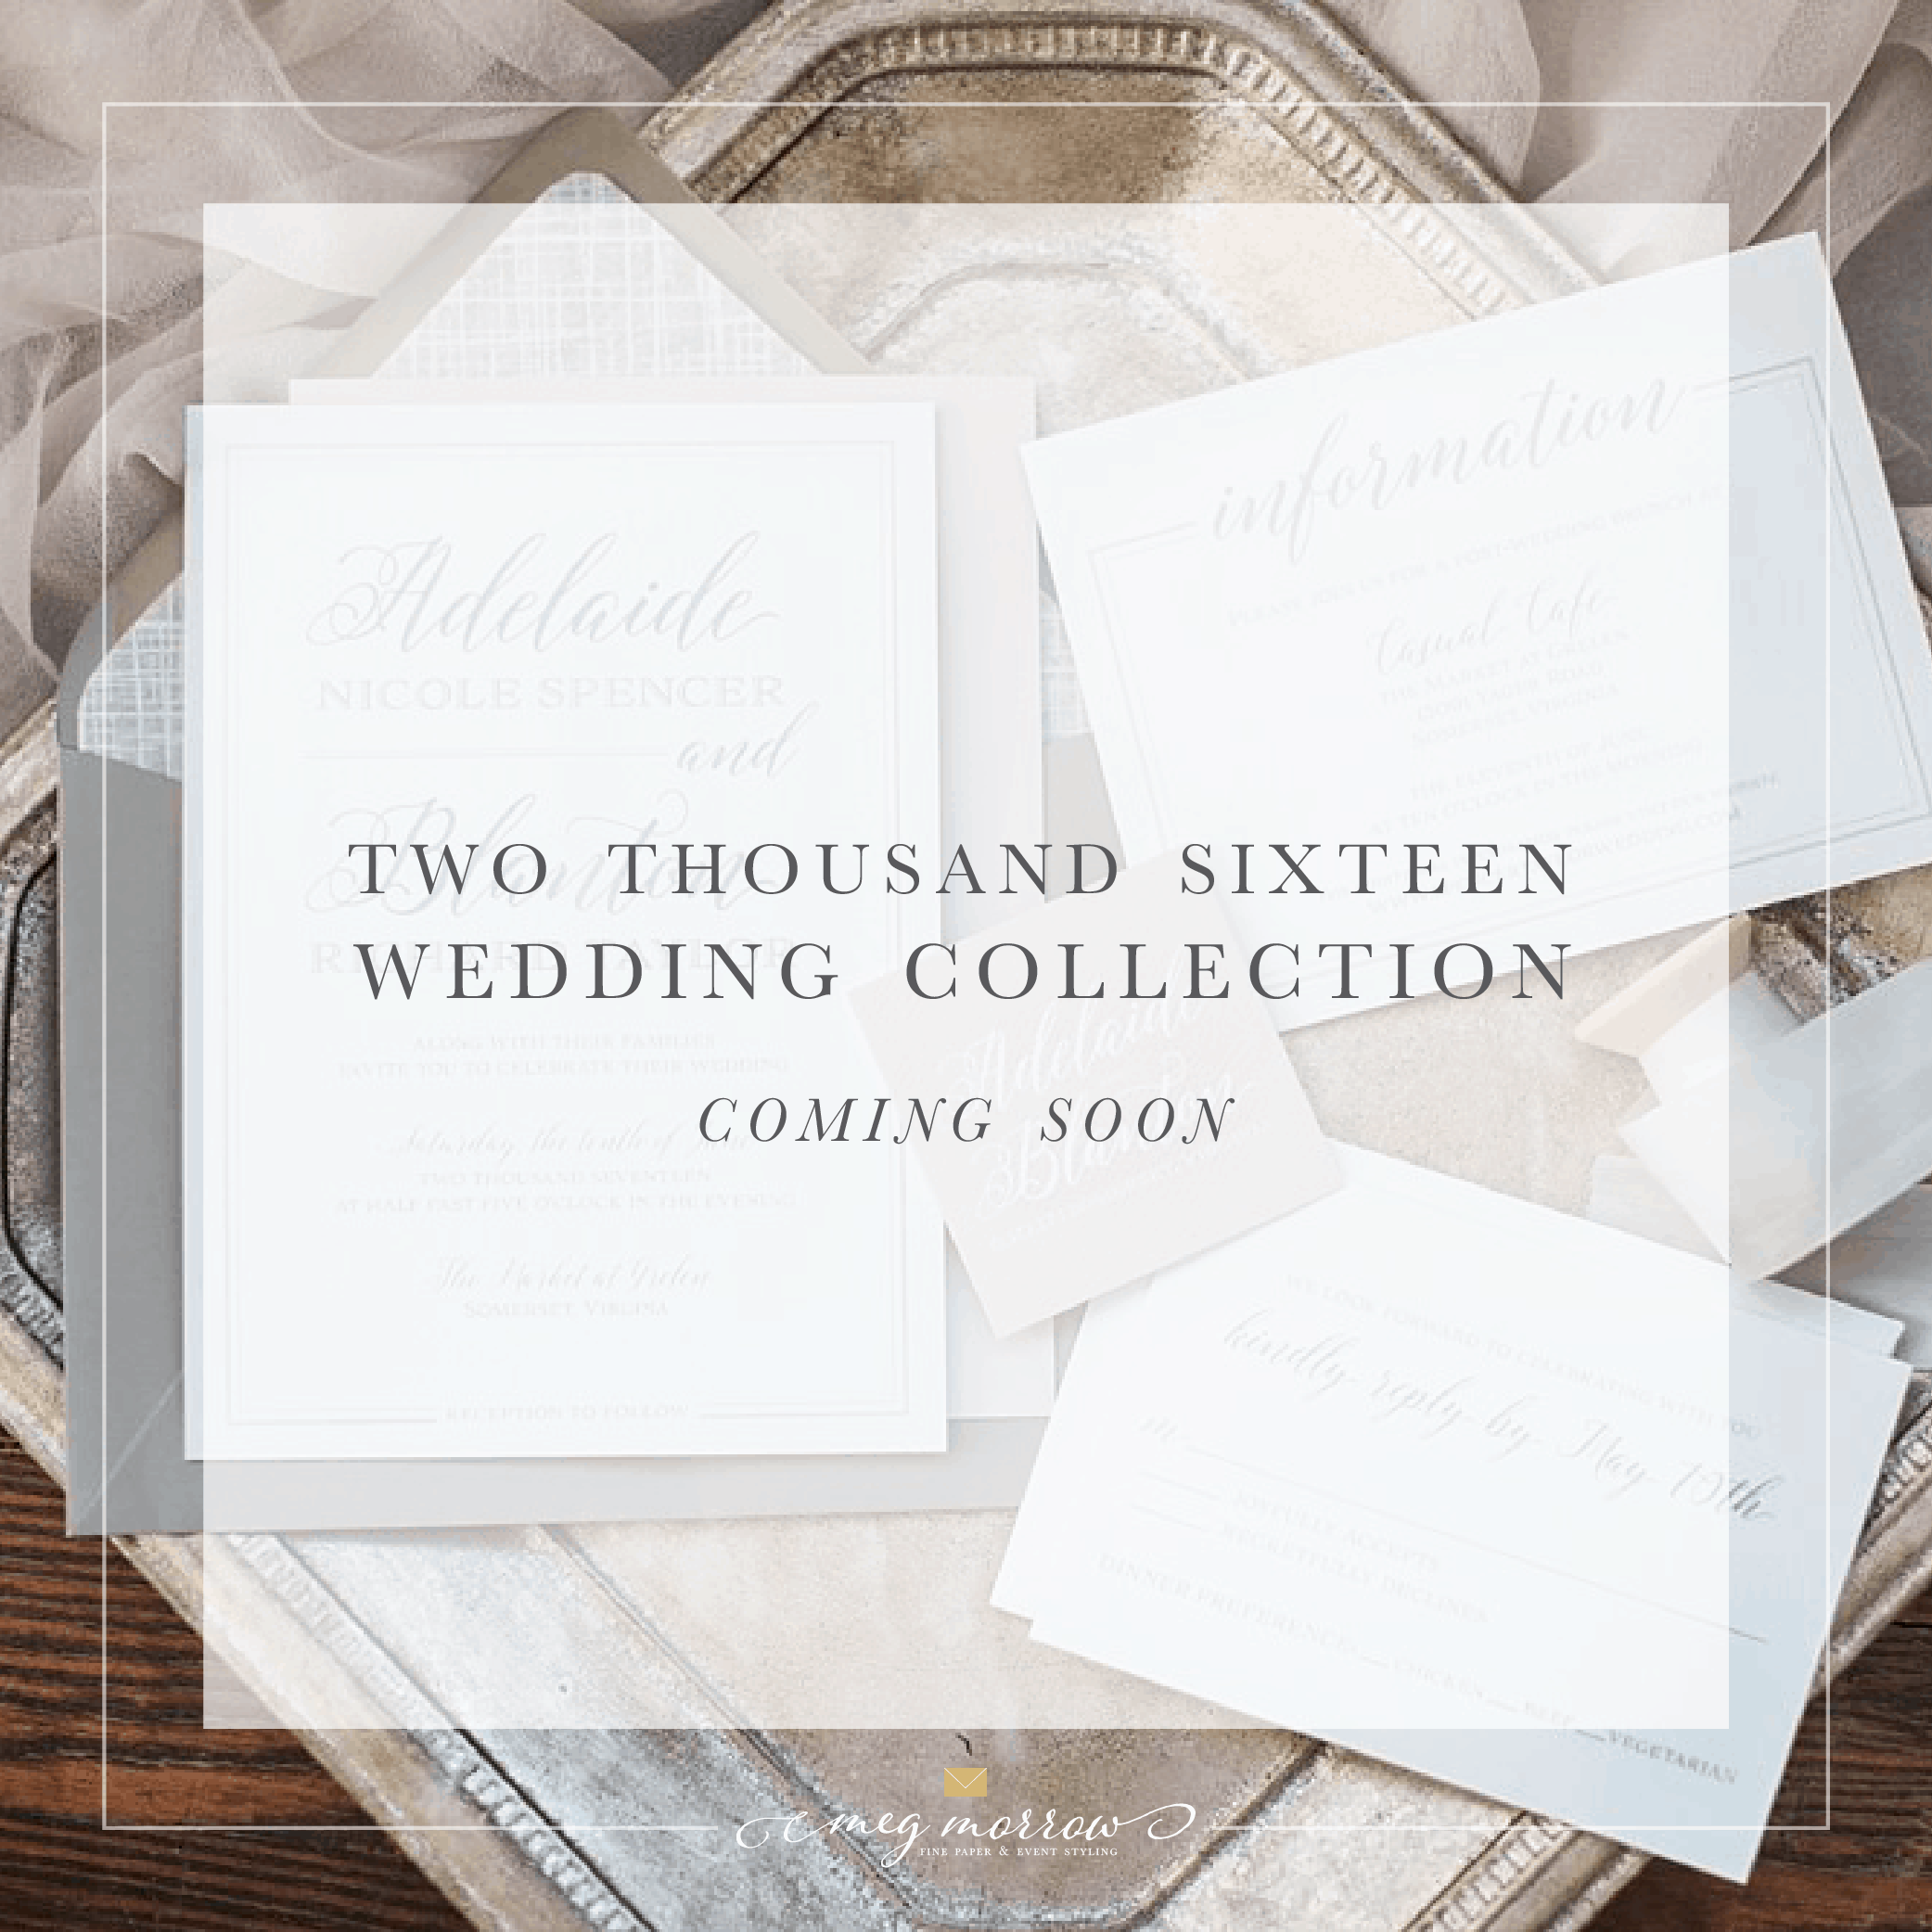 2016 Wedding Invitation Collection Coming Soon